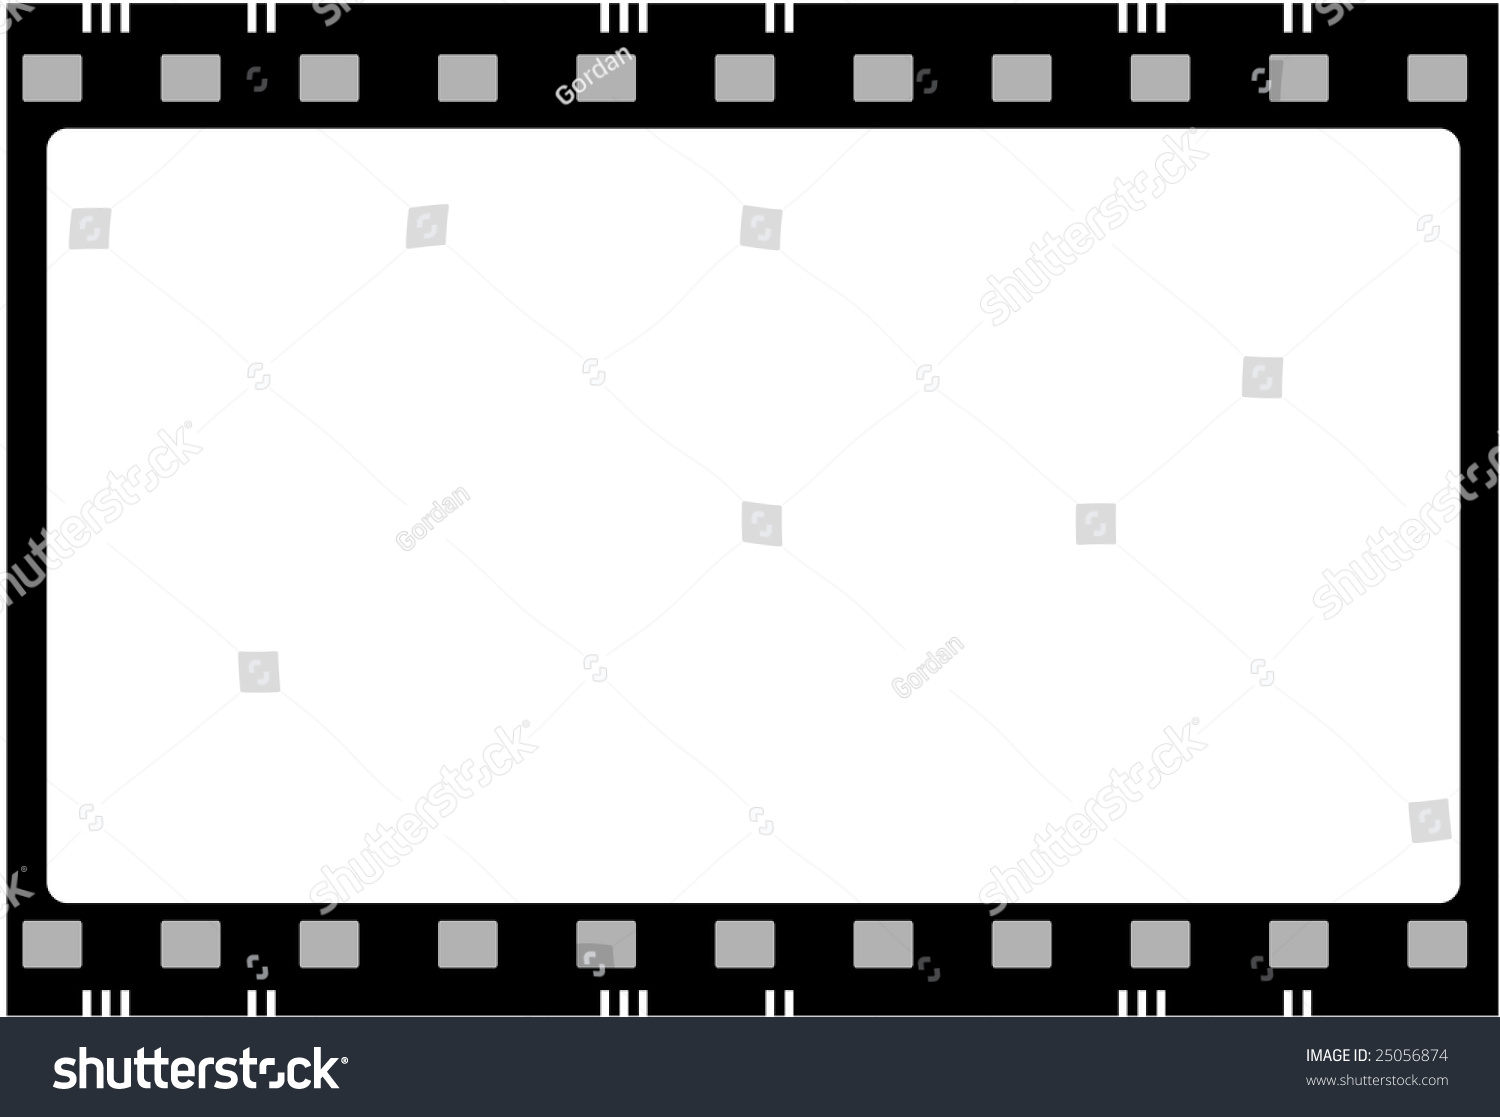 Editable Vector Film Frame Background With Space For Your Text Or Image